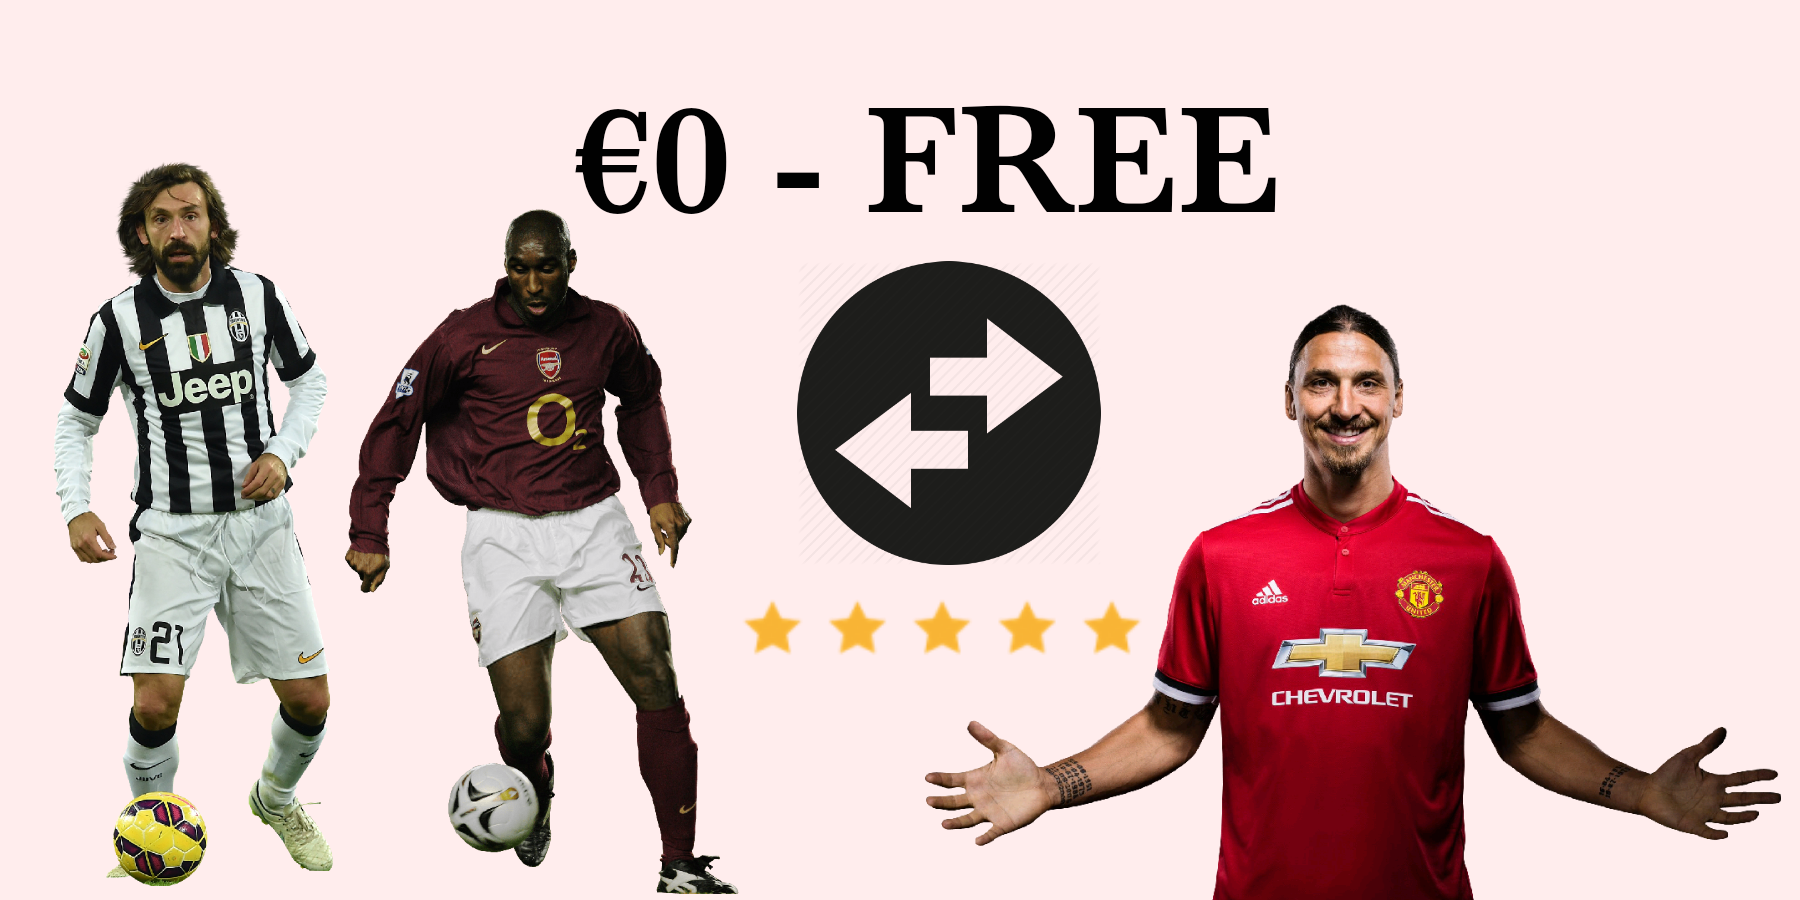 The Best FREE Transfers in Football History Soofootball